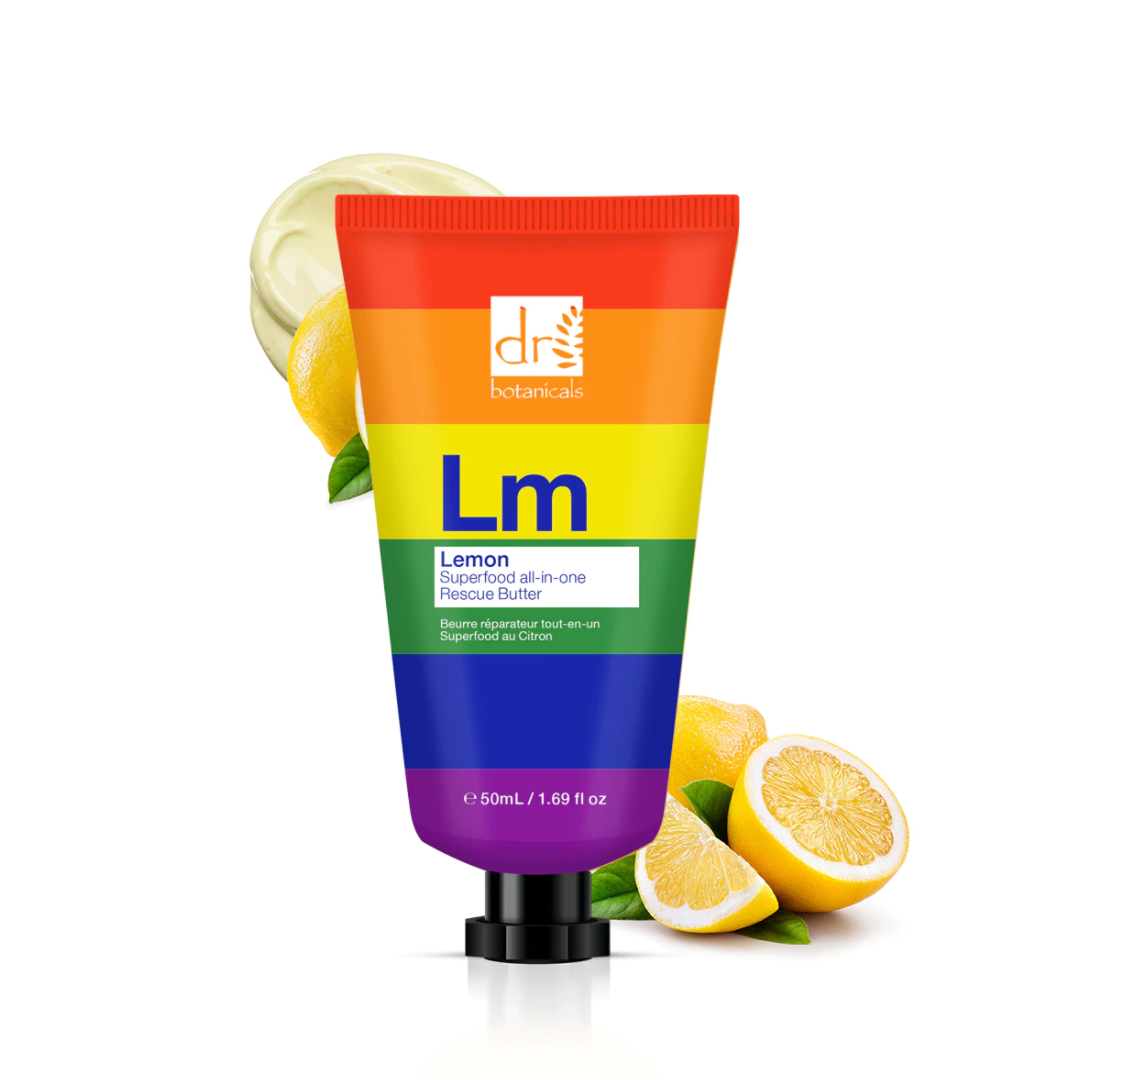 rainbow striped tube of body butter with lemons behind it